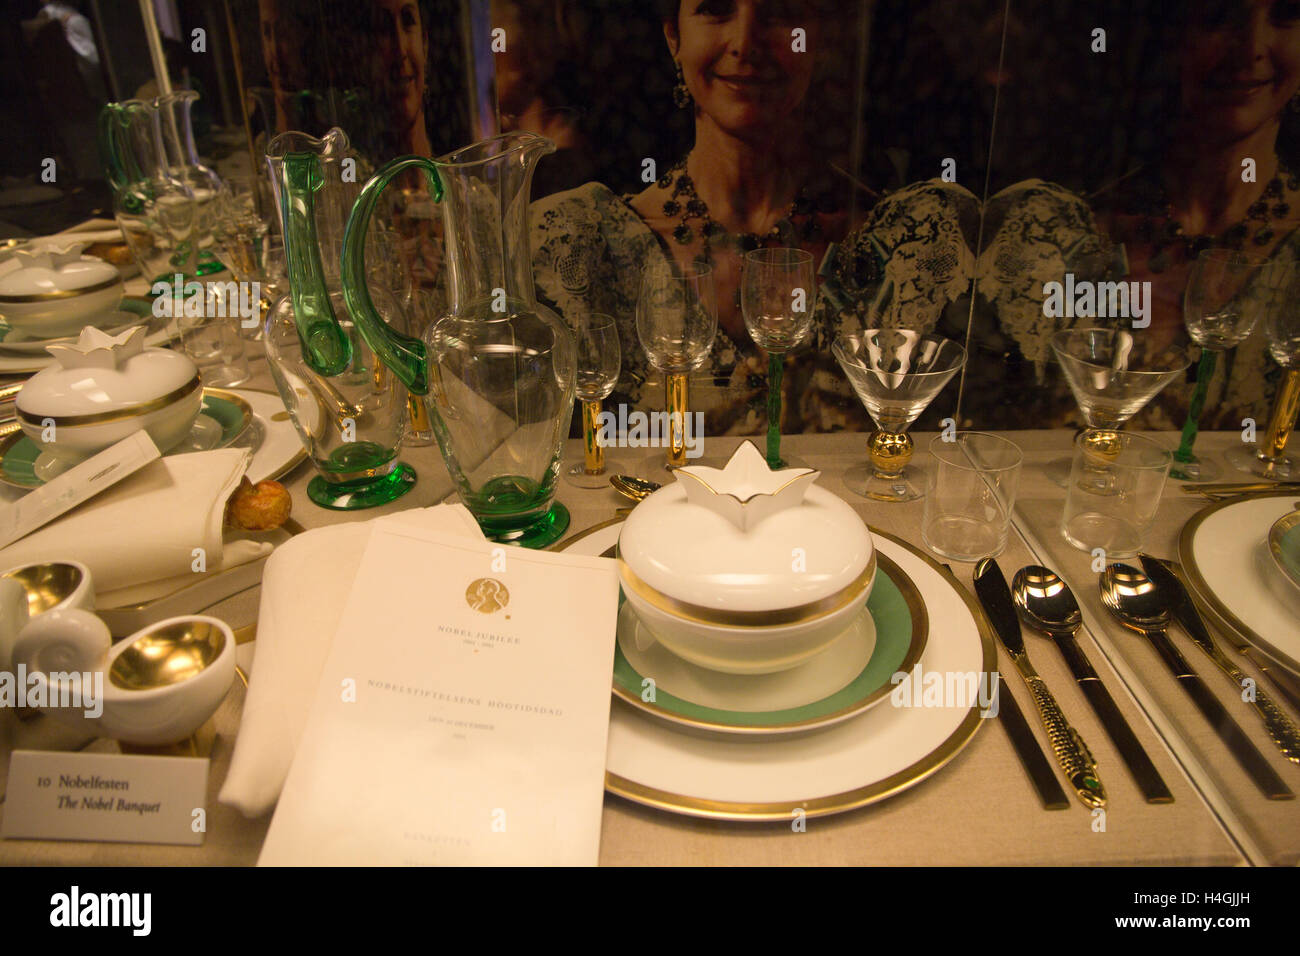 This exhibit at the Nordic Museum features a table setting from the Nobel Peace Prize banquet held annually in Stockholm, Sweden Stock Photo